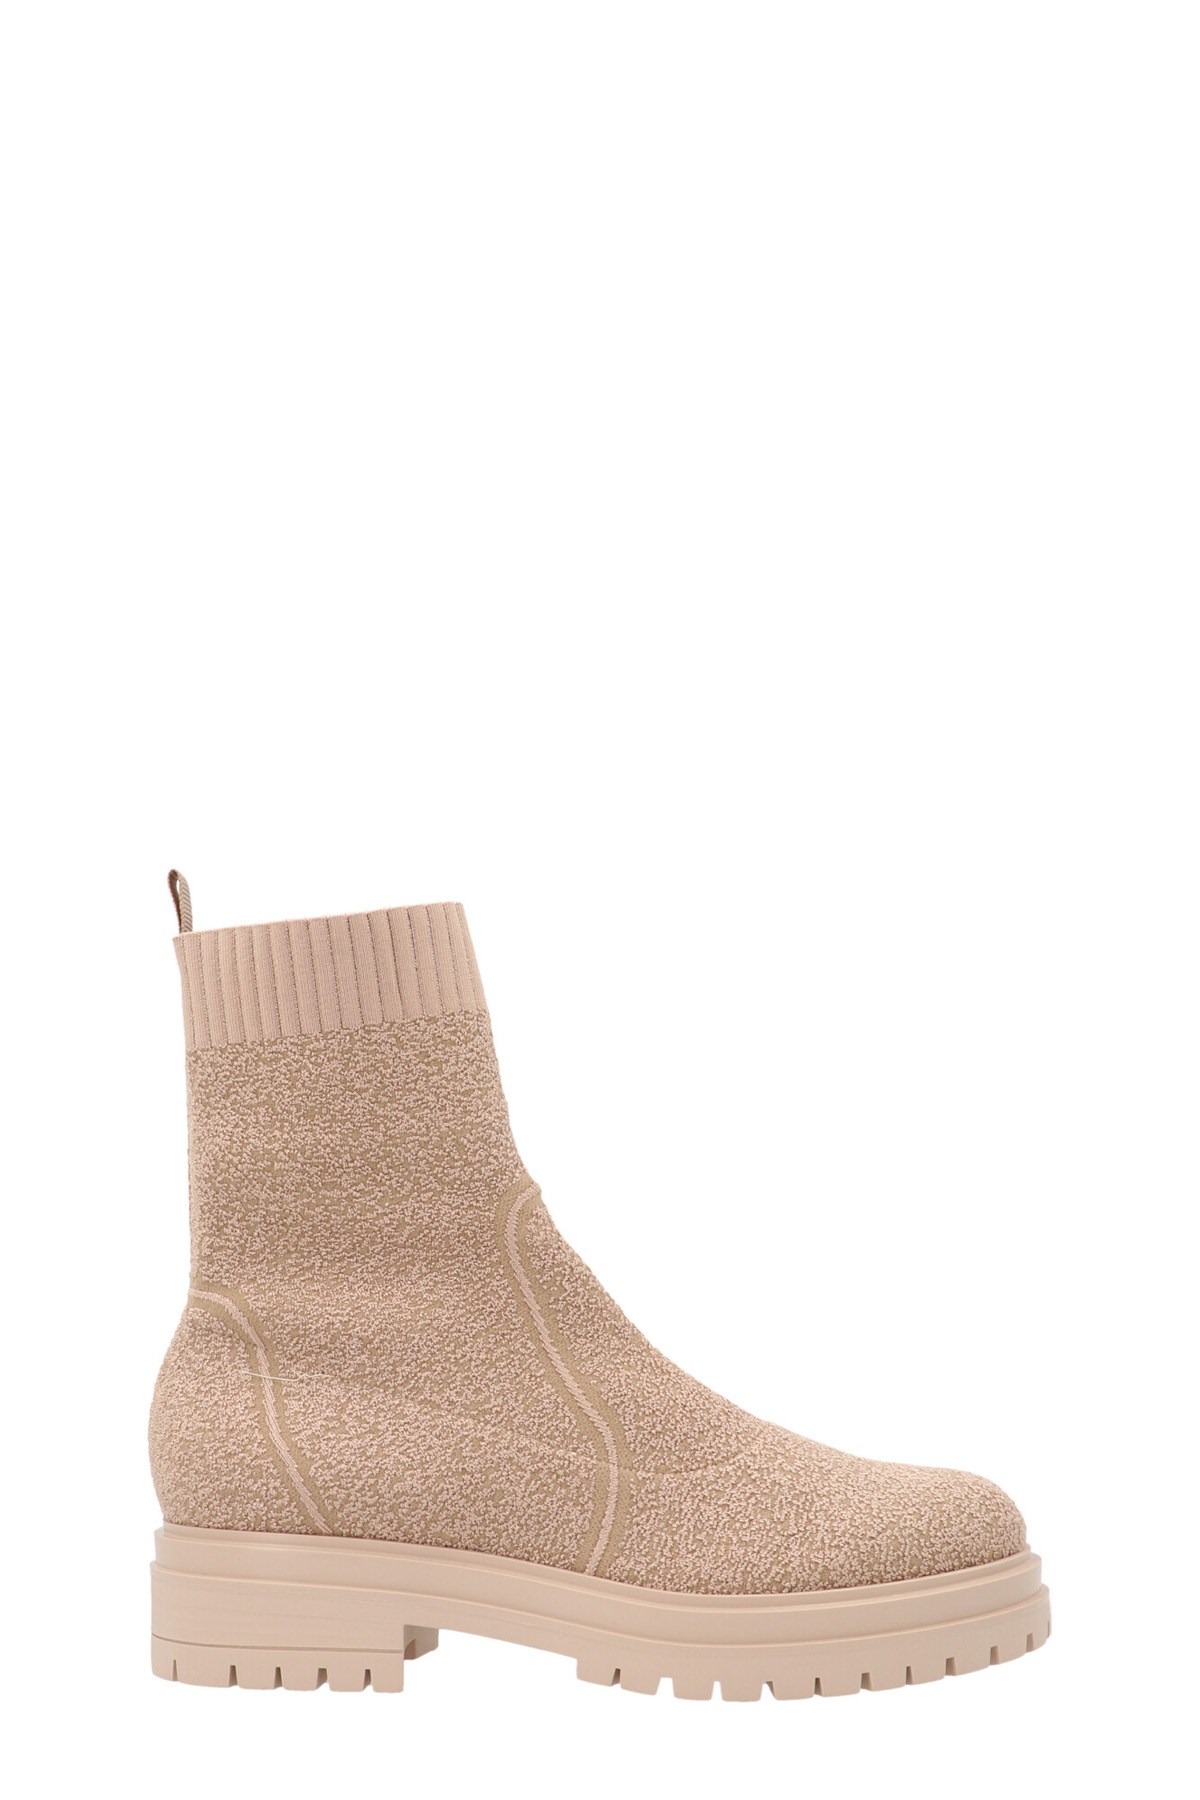 GIANVITO ROSSI 'Knit Bouclé’ Ankle Boots